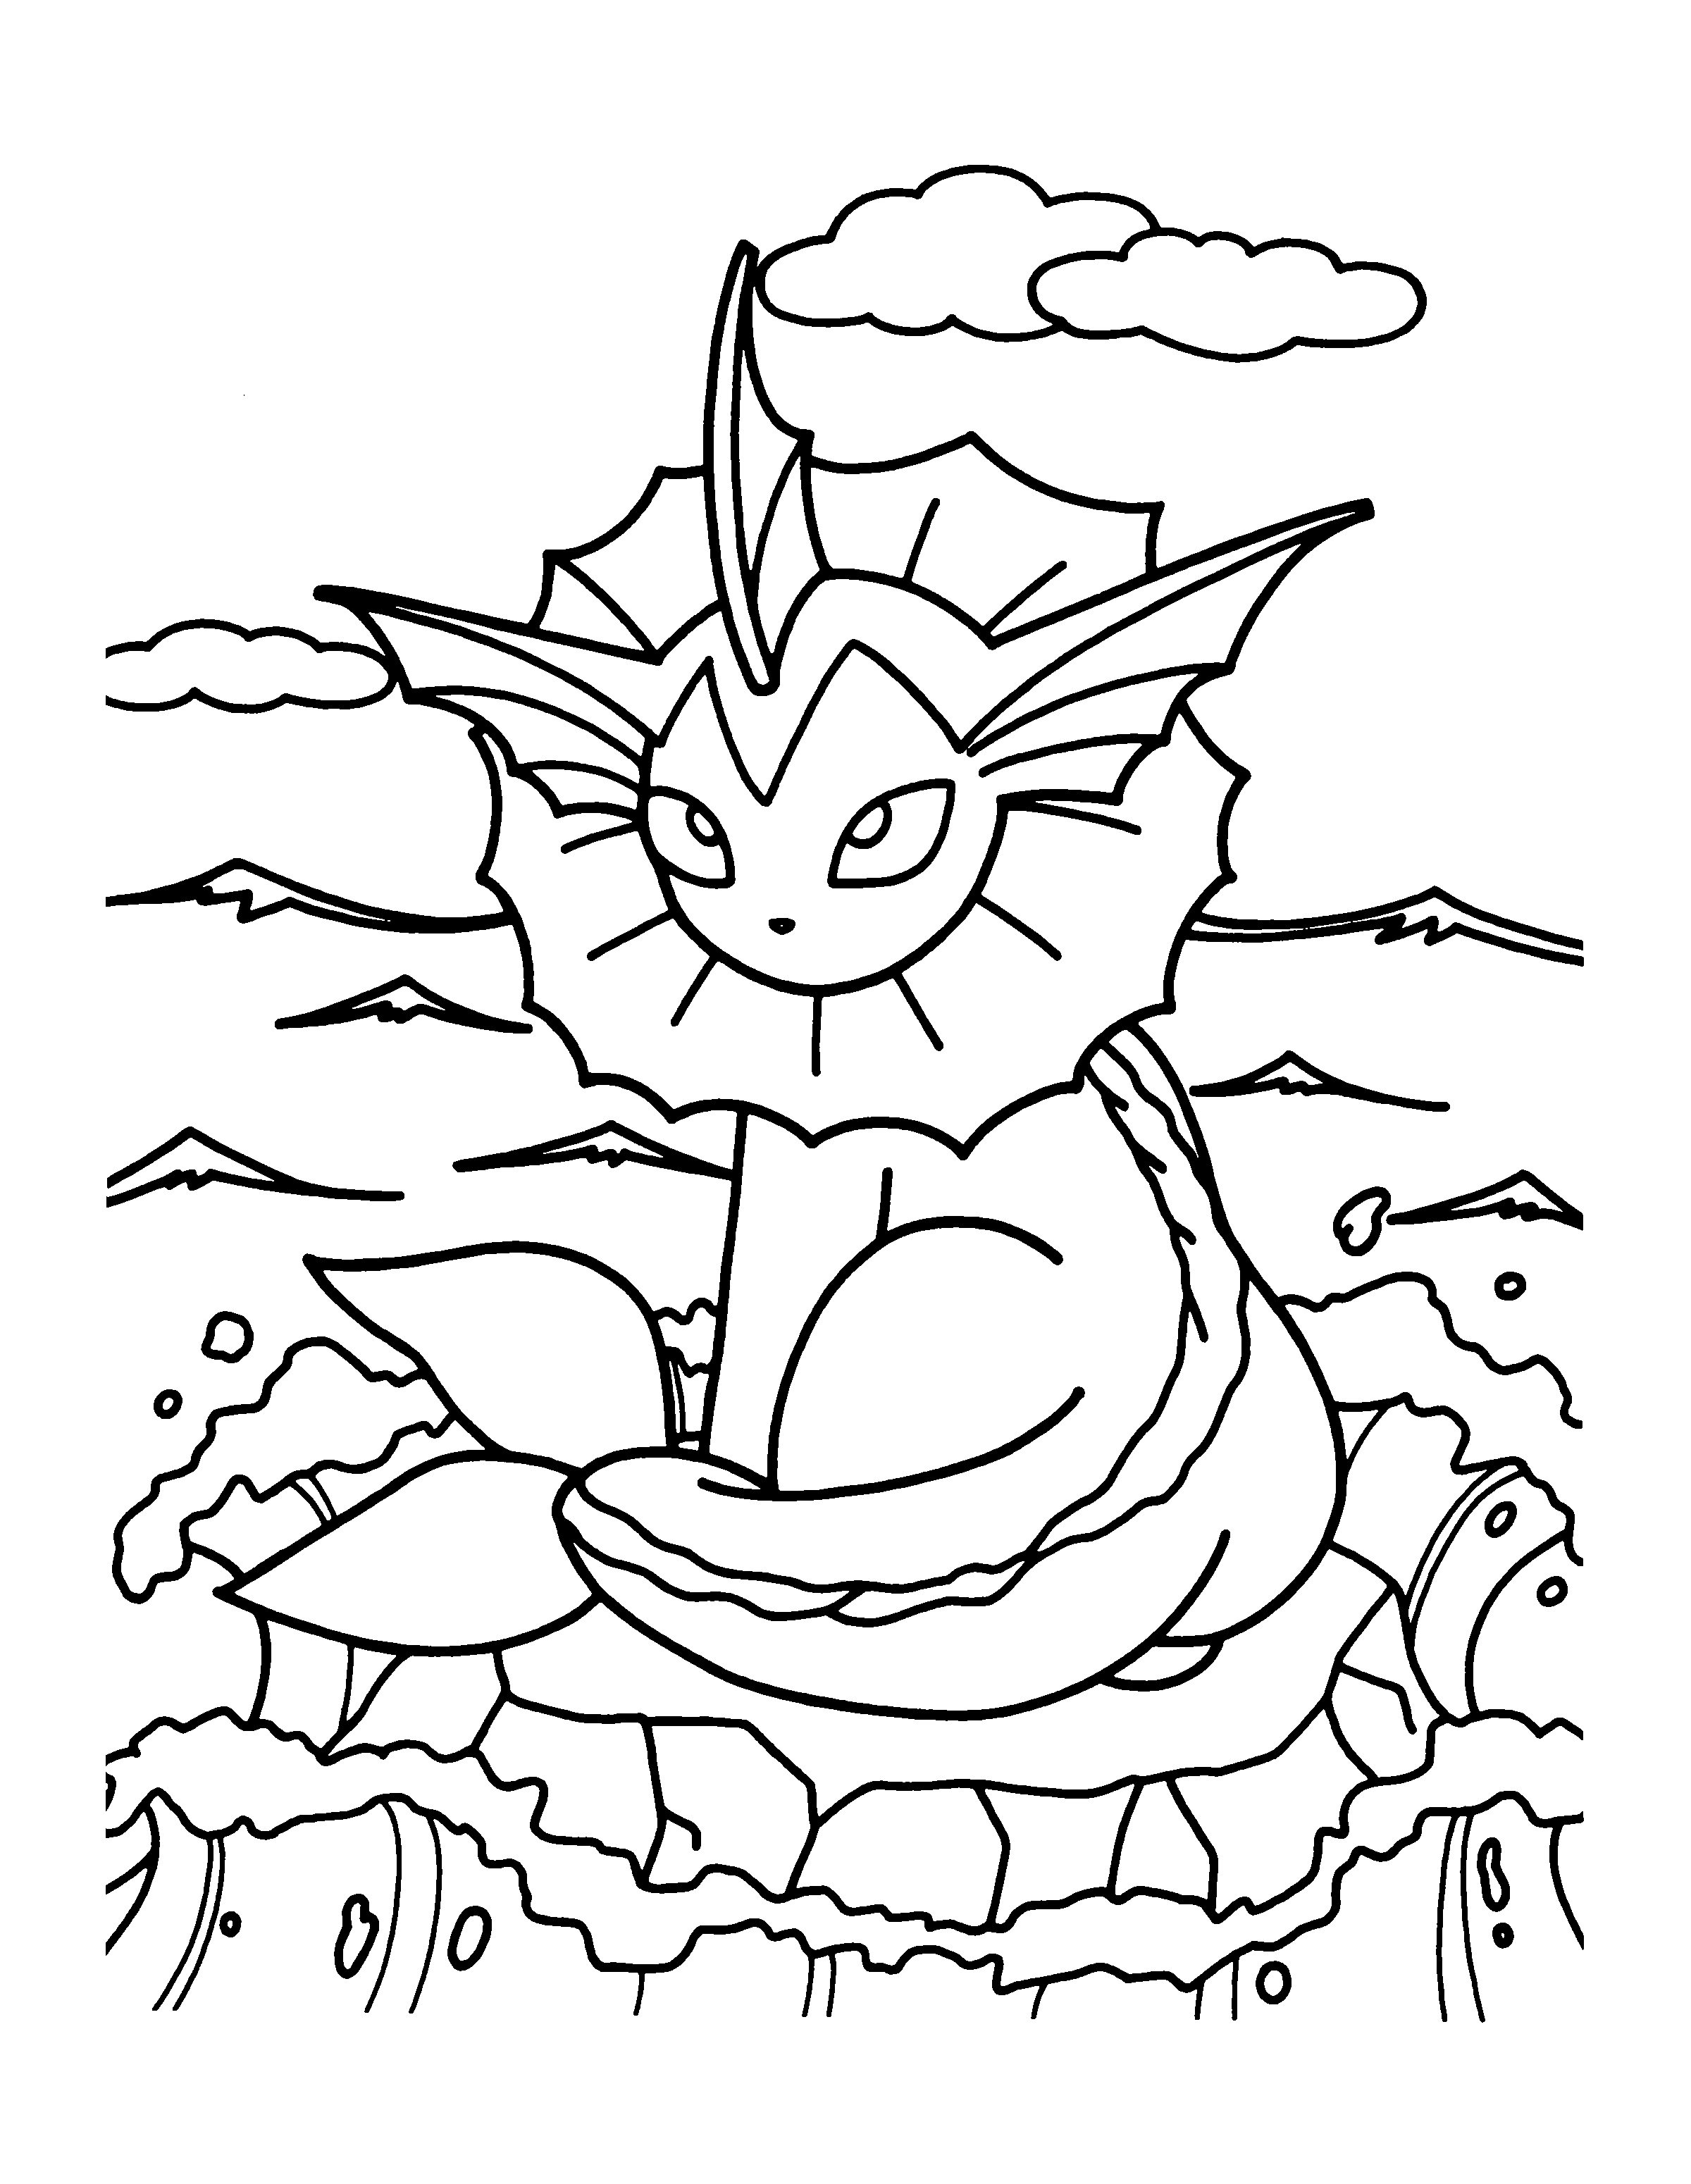 Free Pokemon Coloring Pages For Adults Download Free Pokemon 